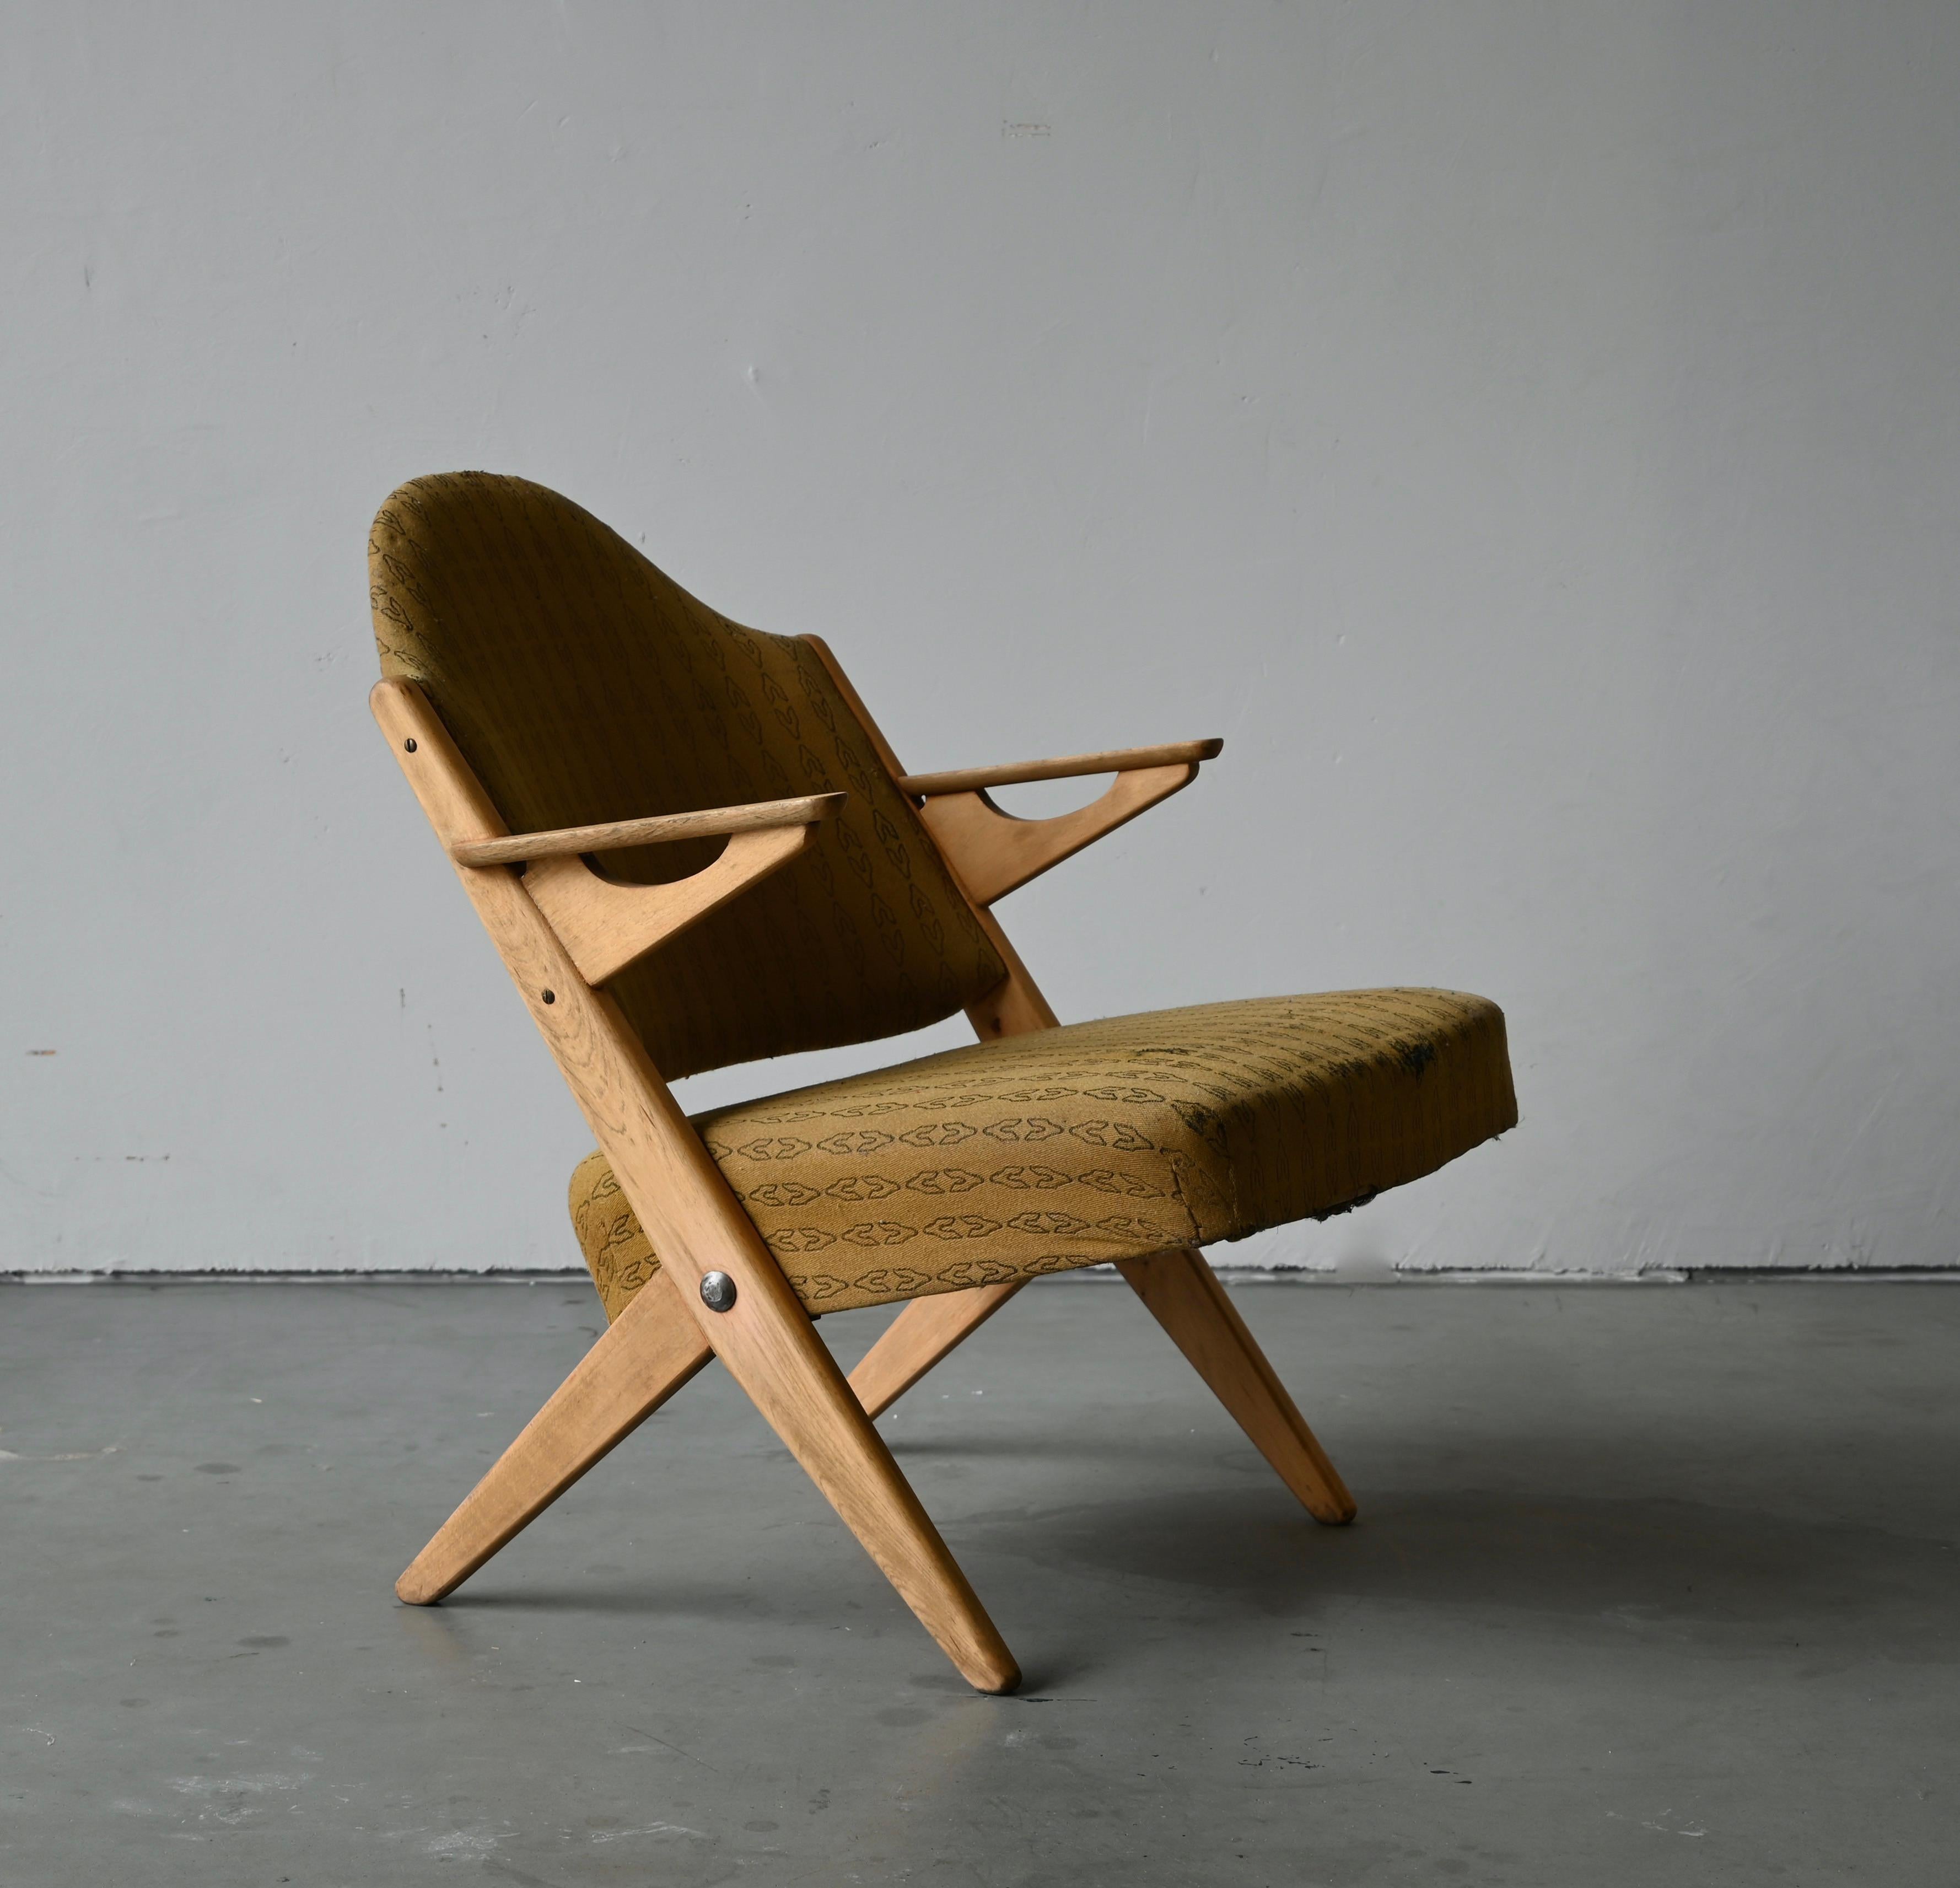 A rare lounge chair / arm chair by Arne Hovmand-Olsen. Designed in 1955, produced by Komfort, Randers, Denmark.

Features solid beech and vintage fabric.

Other designers of the period include Lina Bo Bardi, Pierre Jeanneret, Hans Wegner, Finn